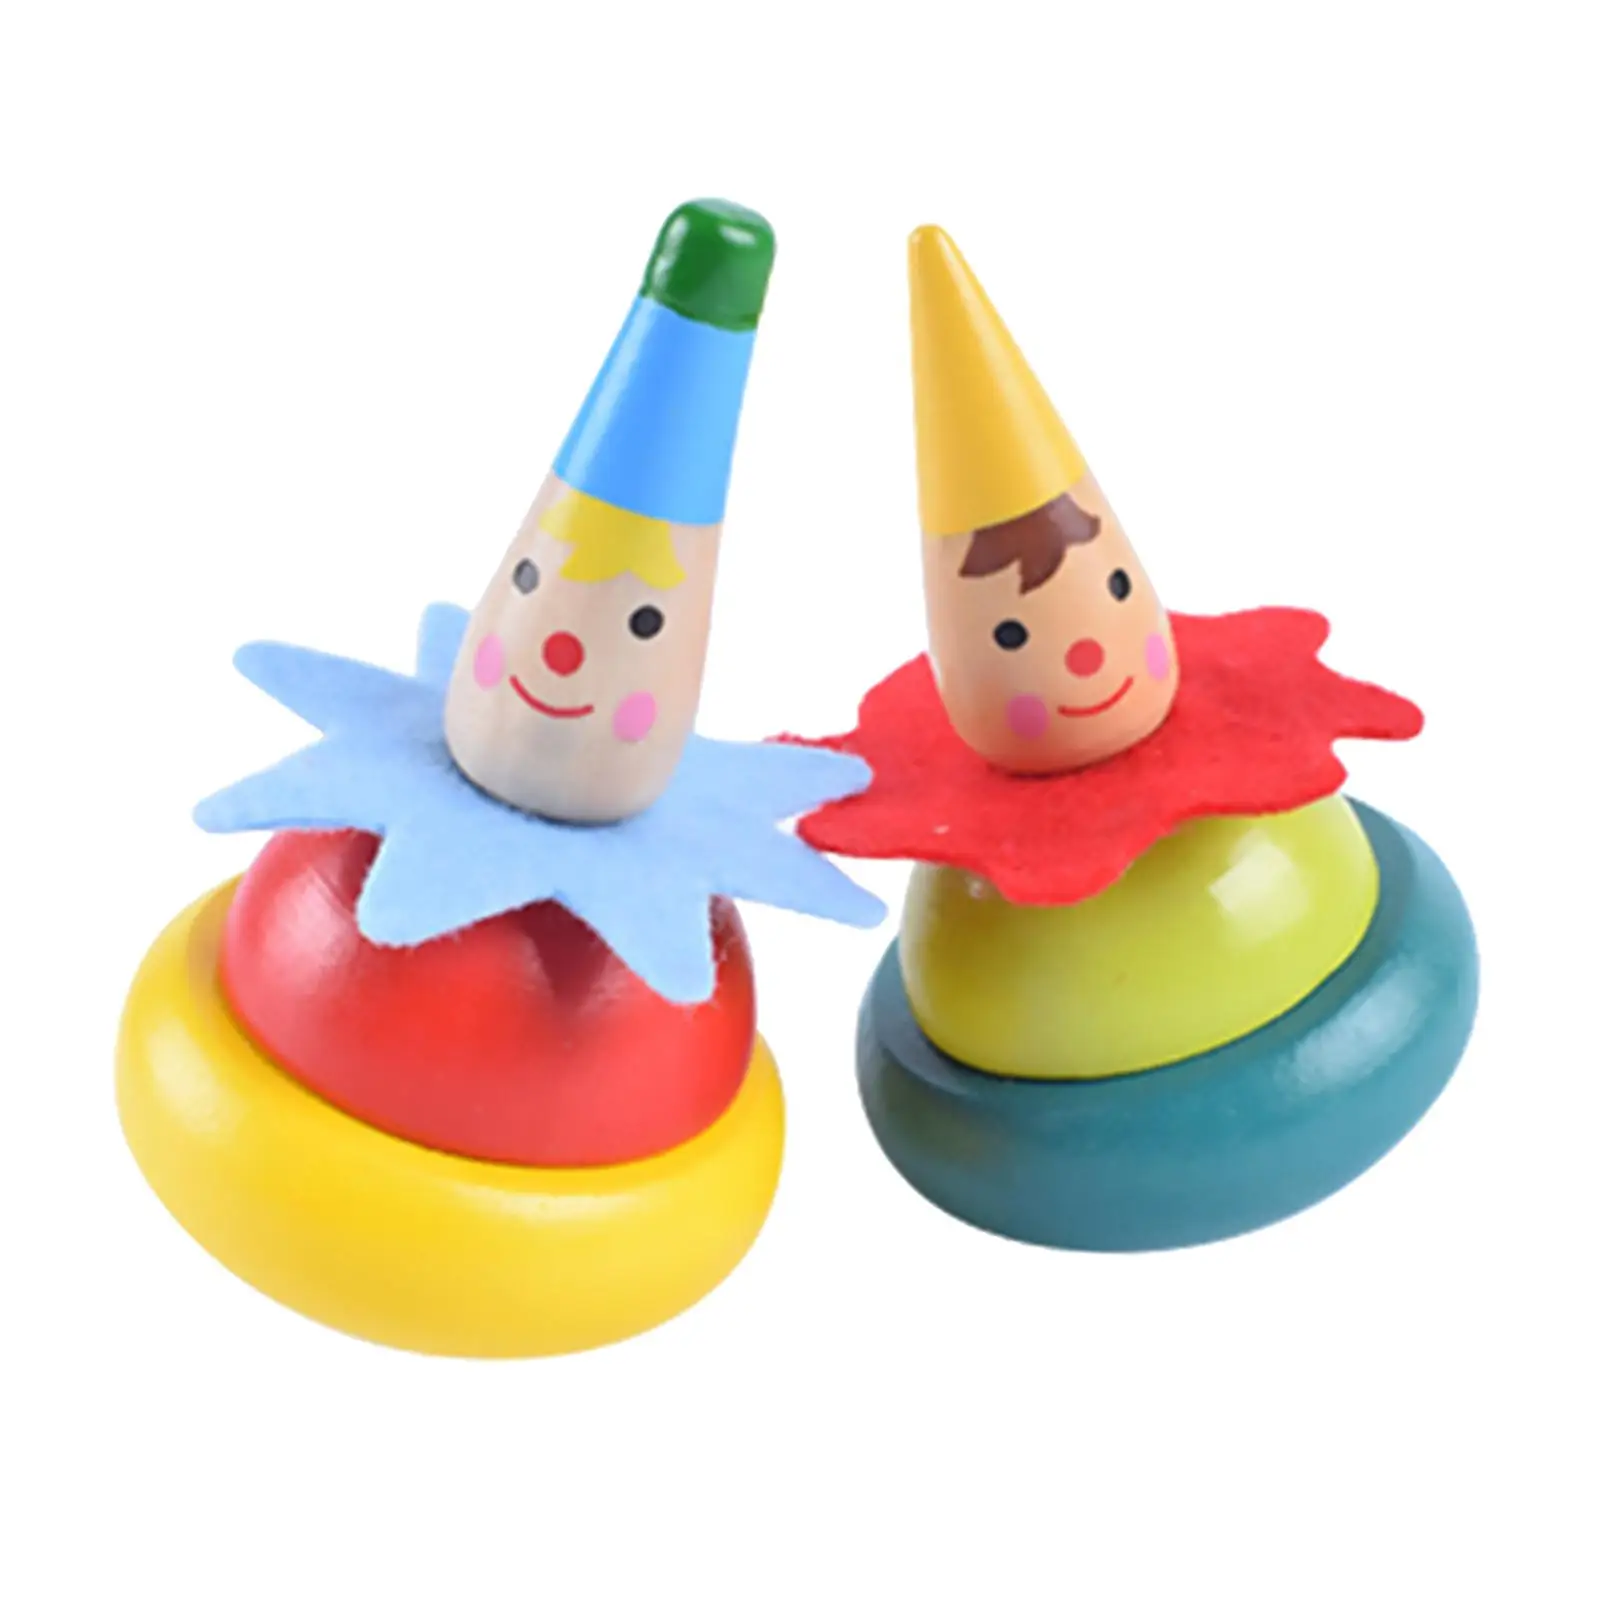 Classic Wooden Whirling Toy Learning Toys Brain Development for Toddler